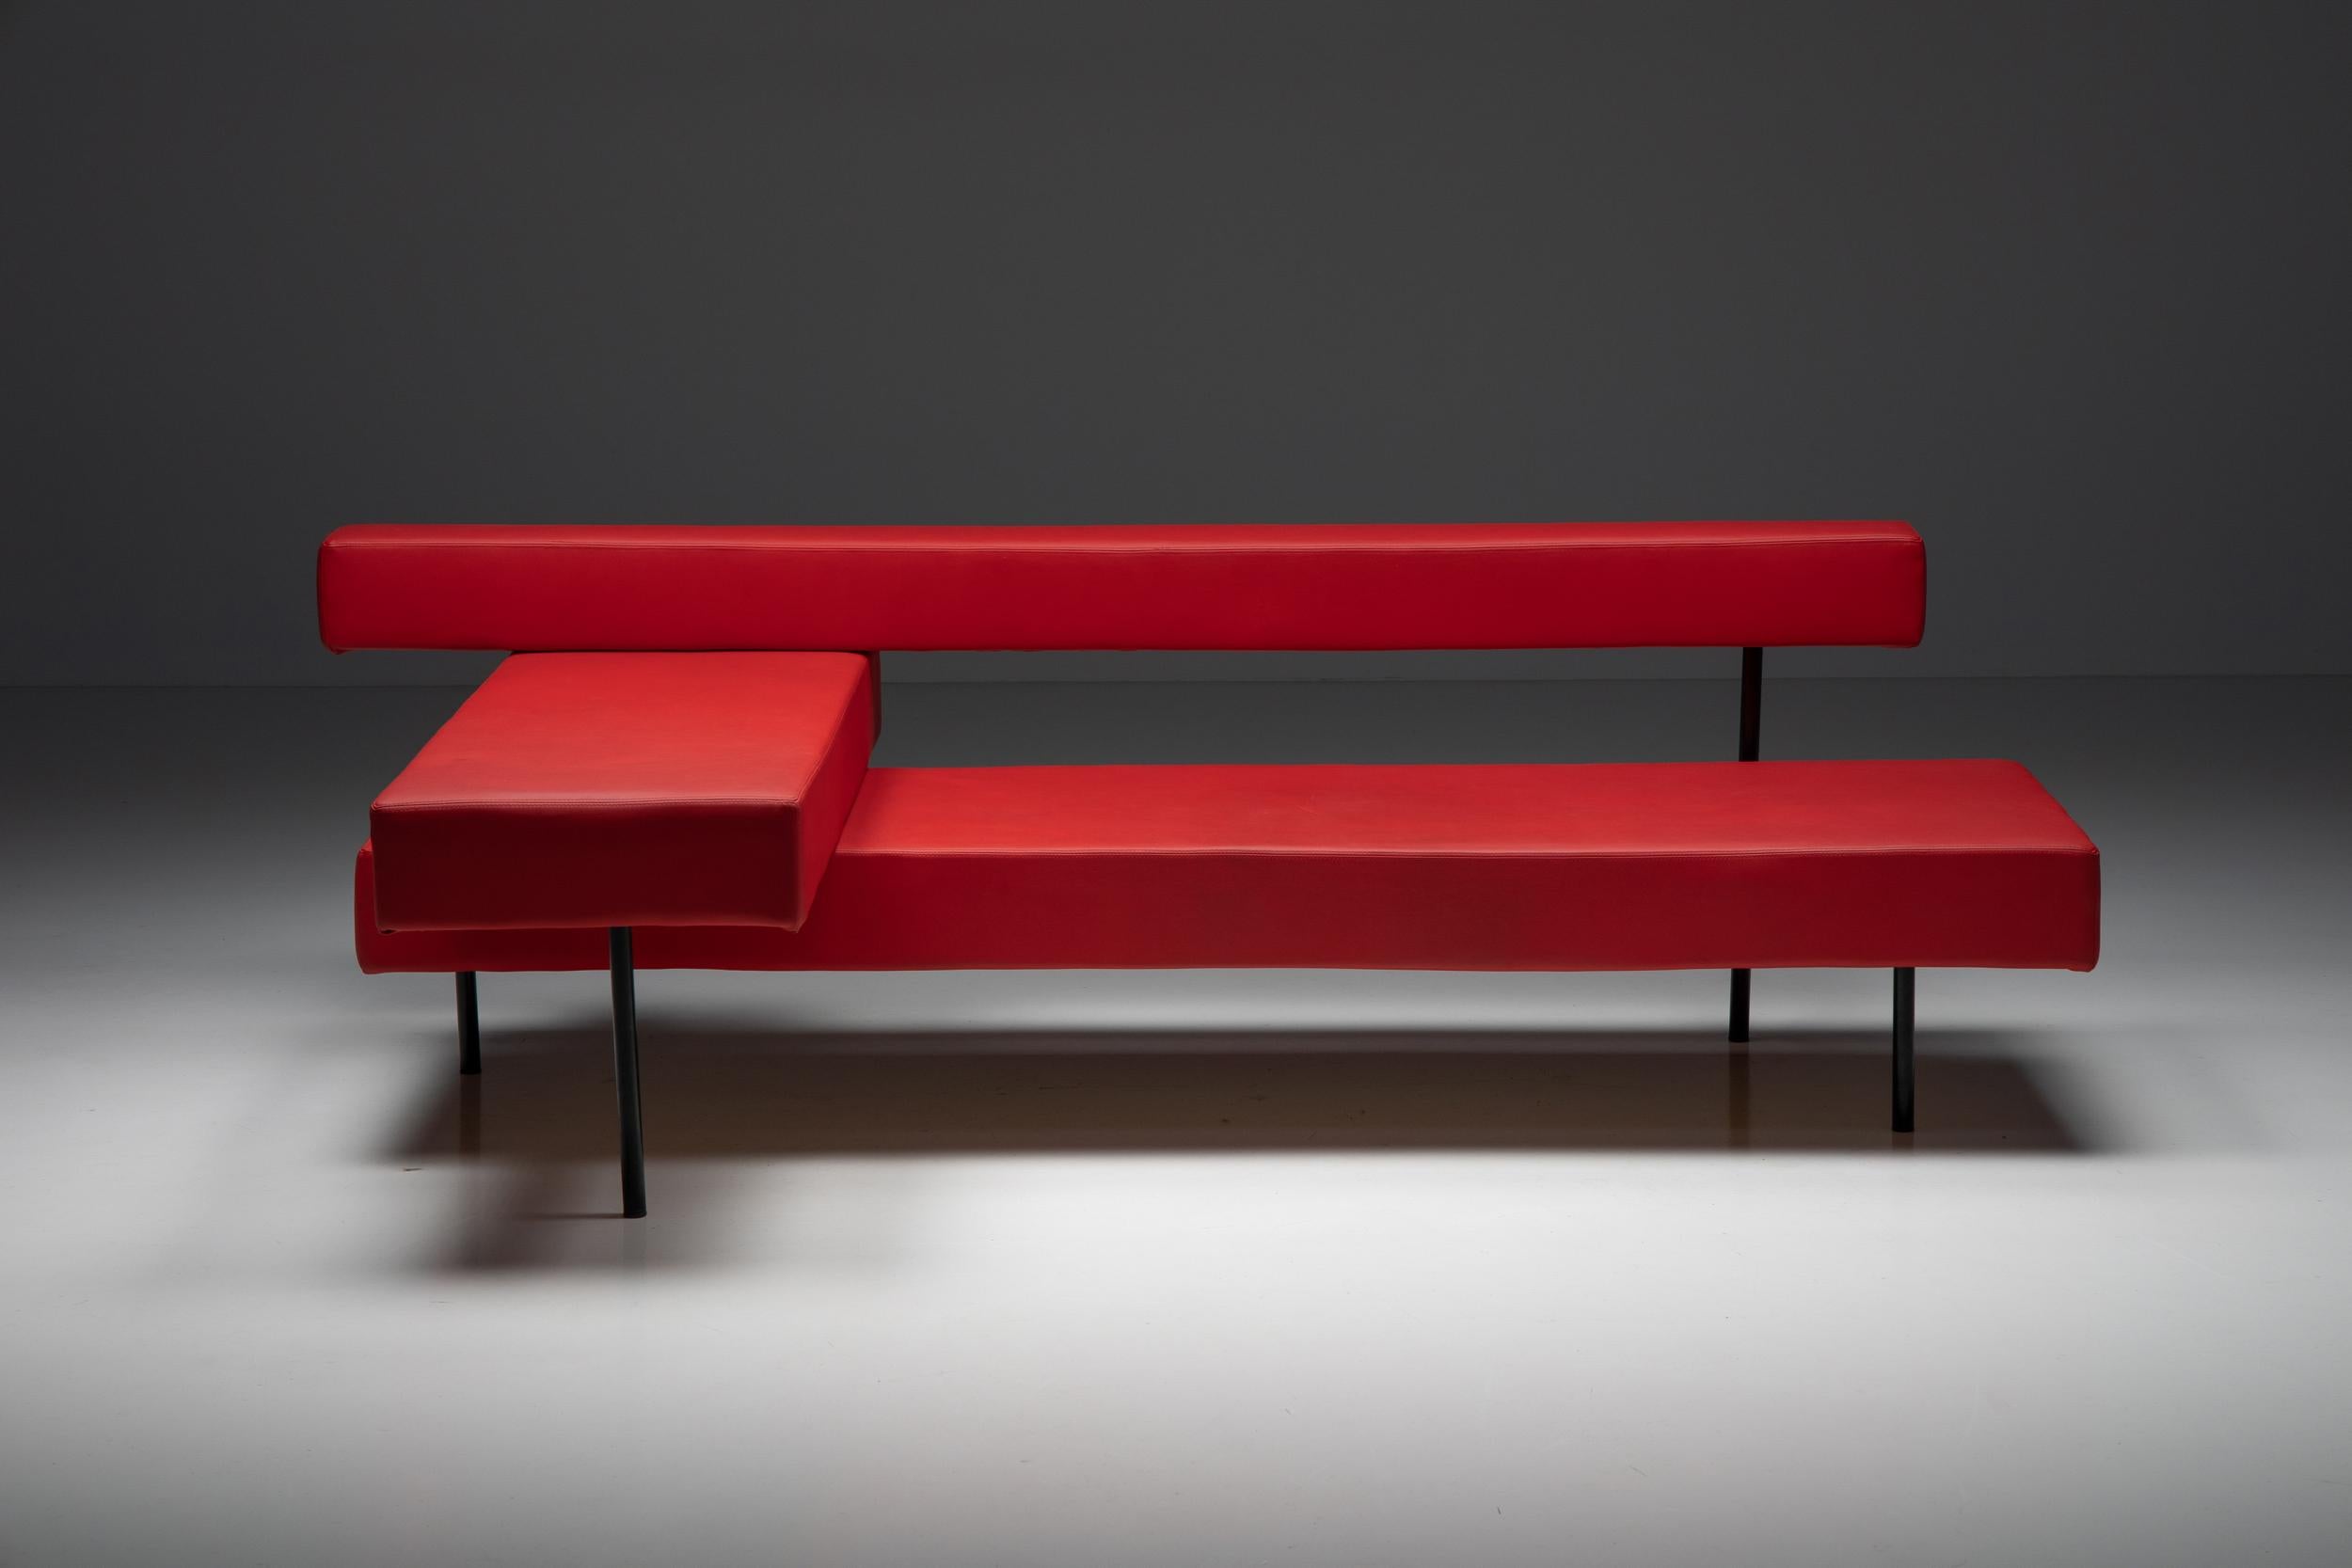 Postmodern Rectangular Red Architectural Sofa, Belgian design, unique prototype, early 21st century, faux-leather

This postmodern architectural prototype has a metal base and three red faux-leather elements that make up the armrest, backrest, and